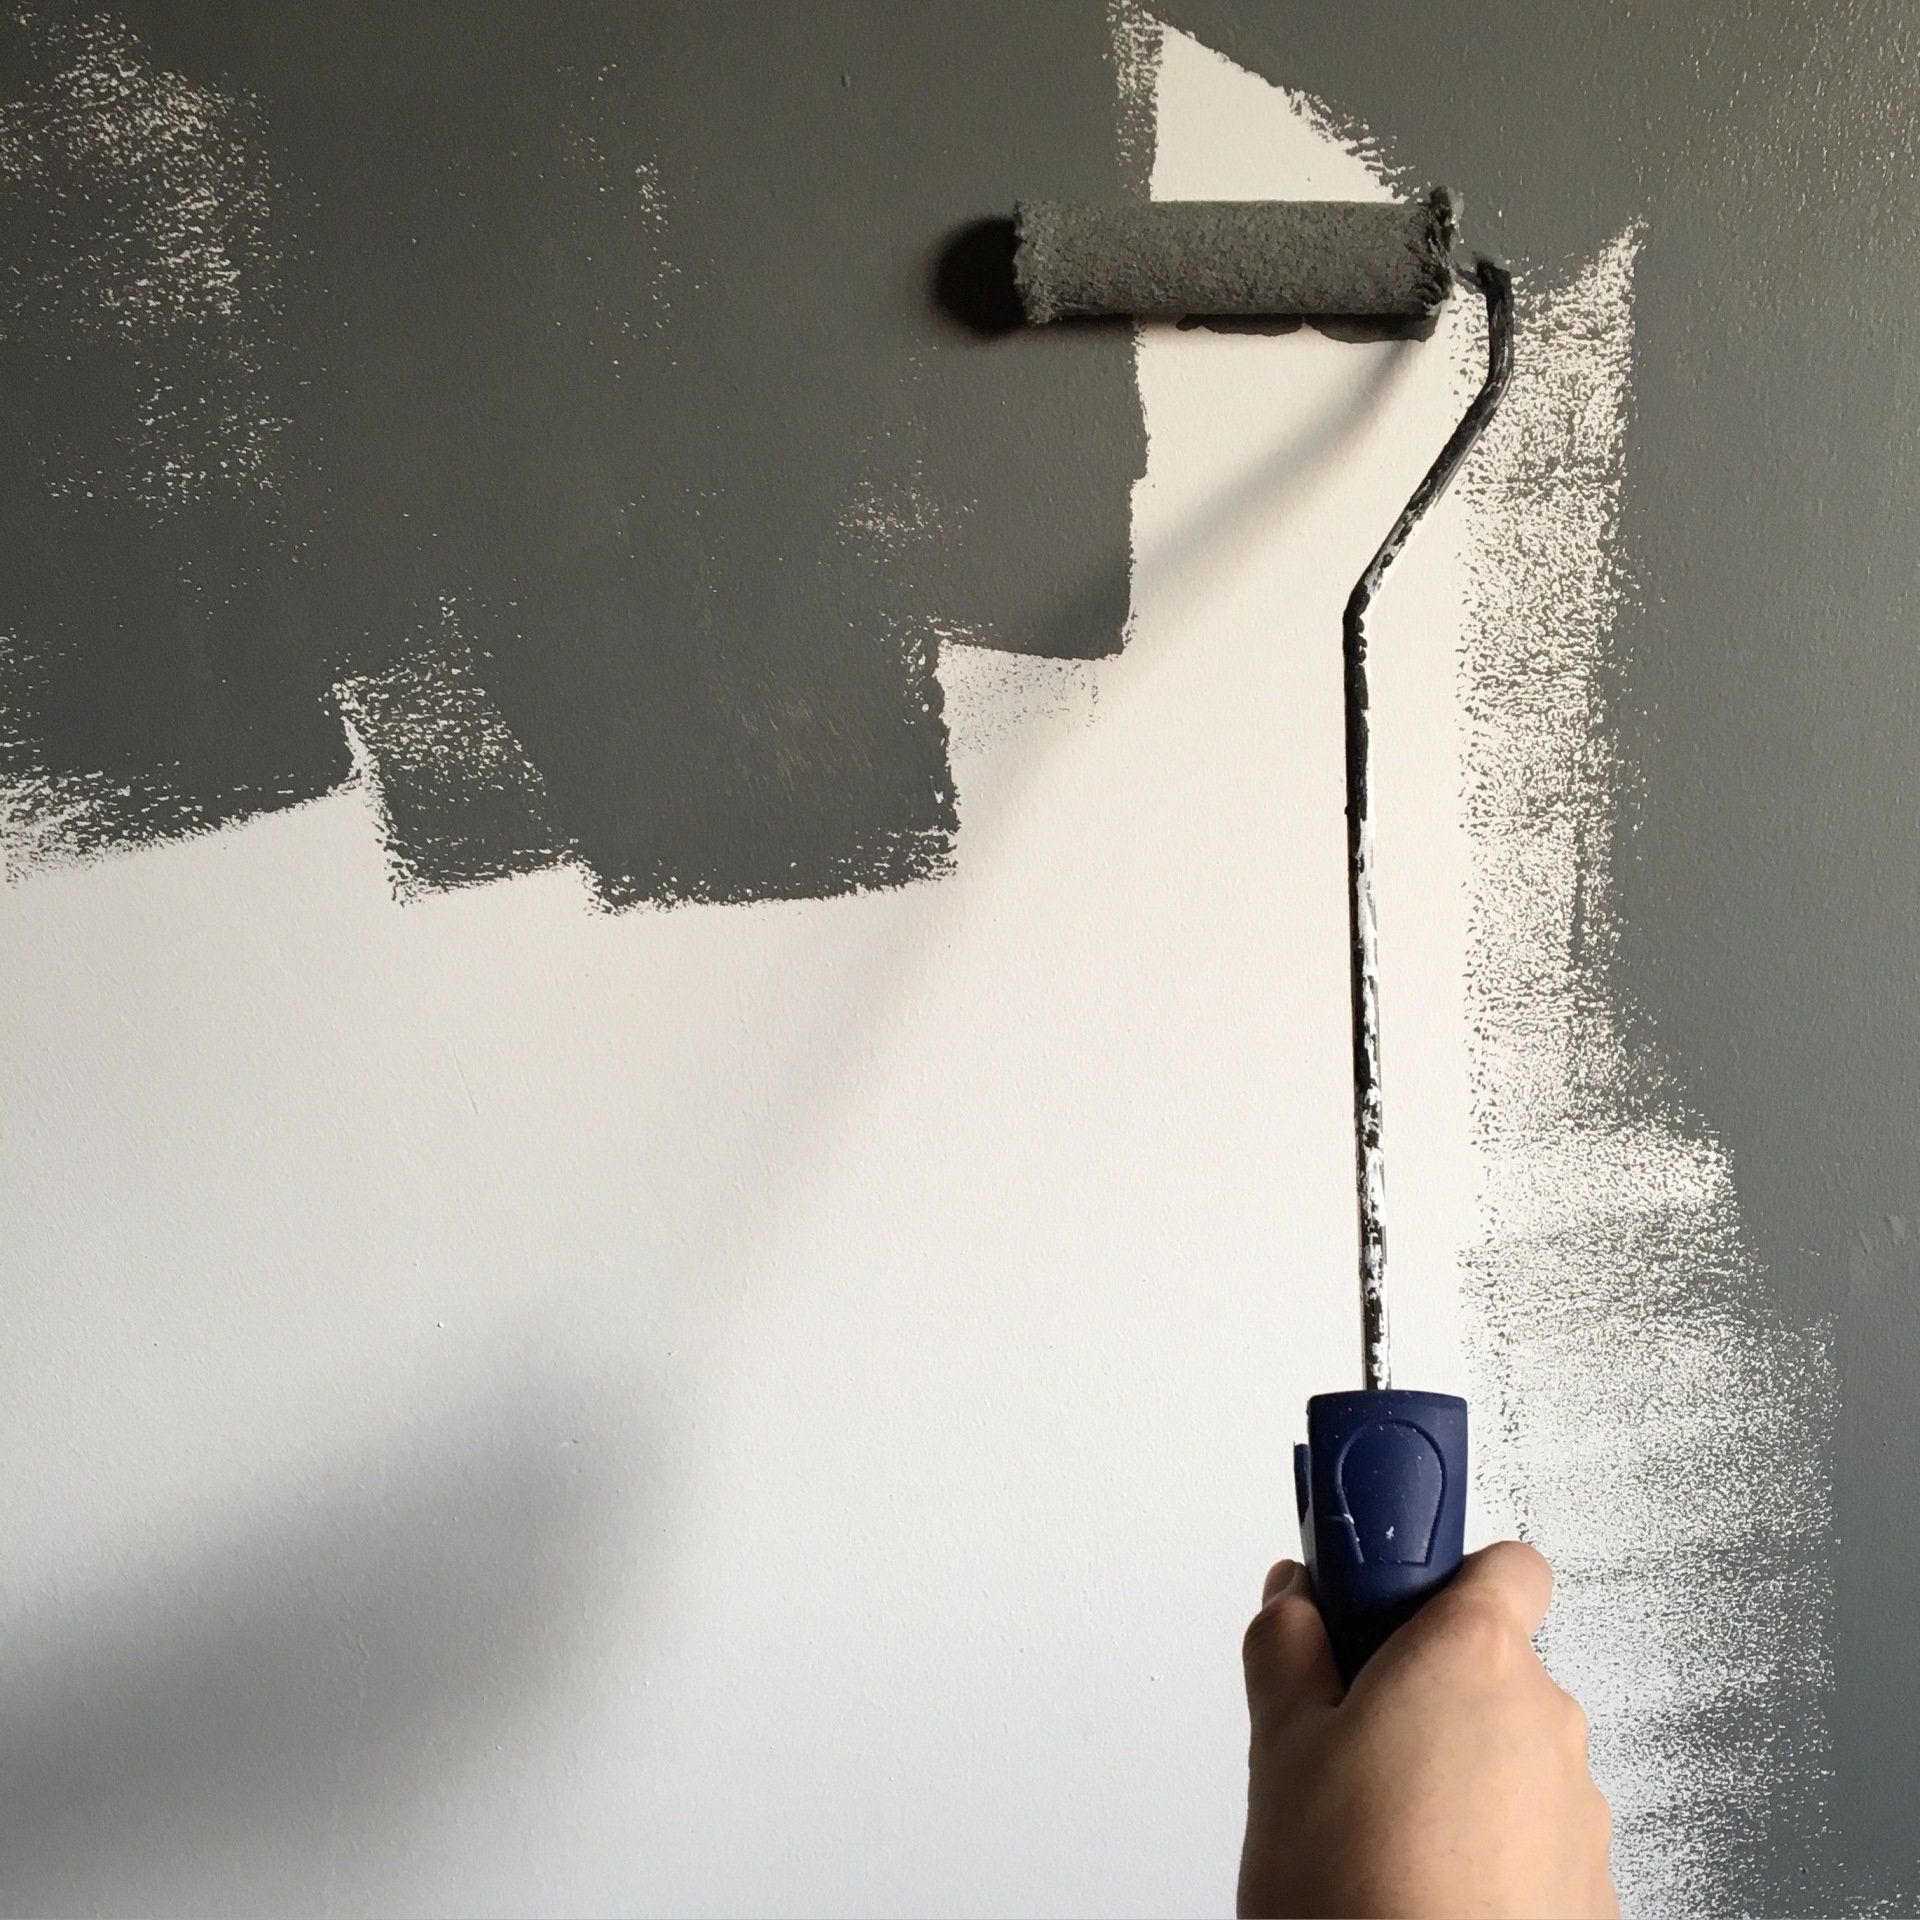 painting a wall using roller